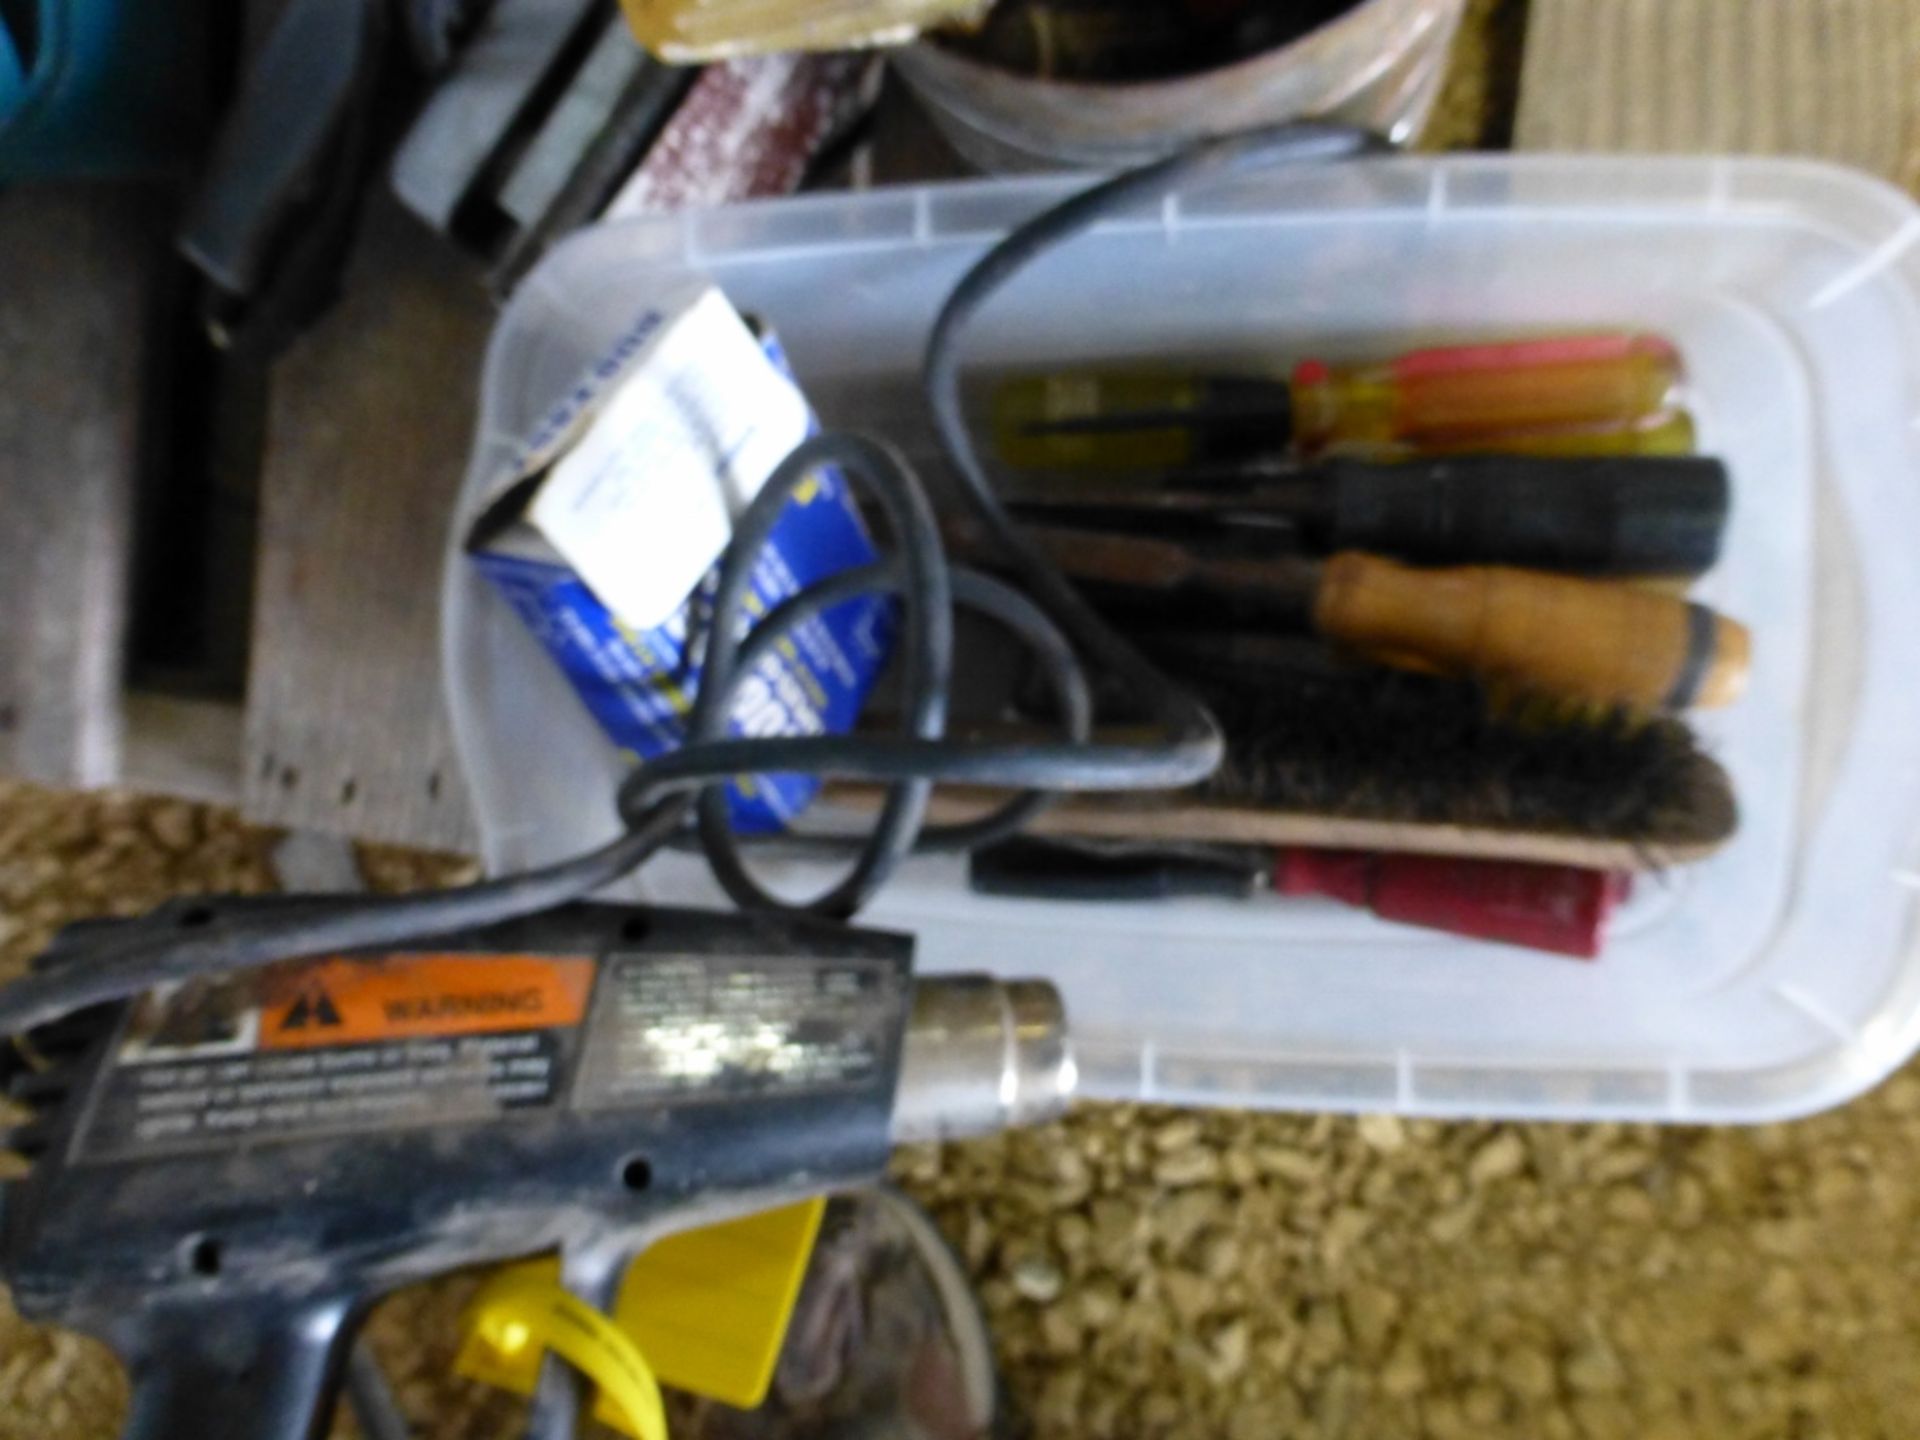 Tub with sander, drill, wire brush, screwdrivers, etc. - Image 3 of 3